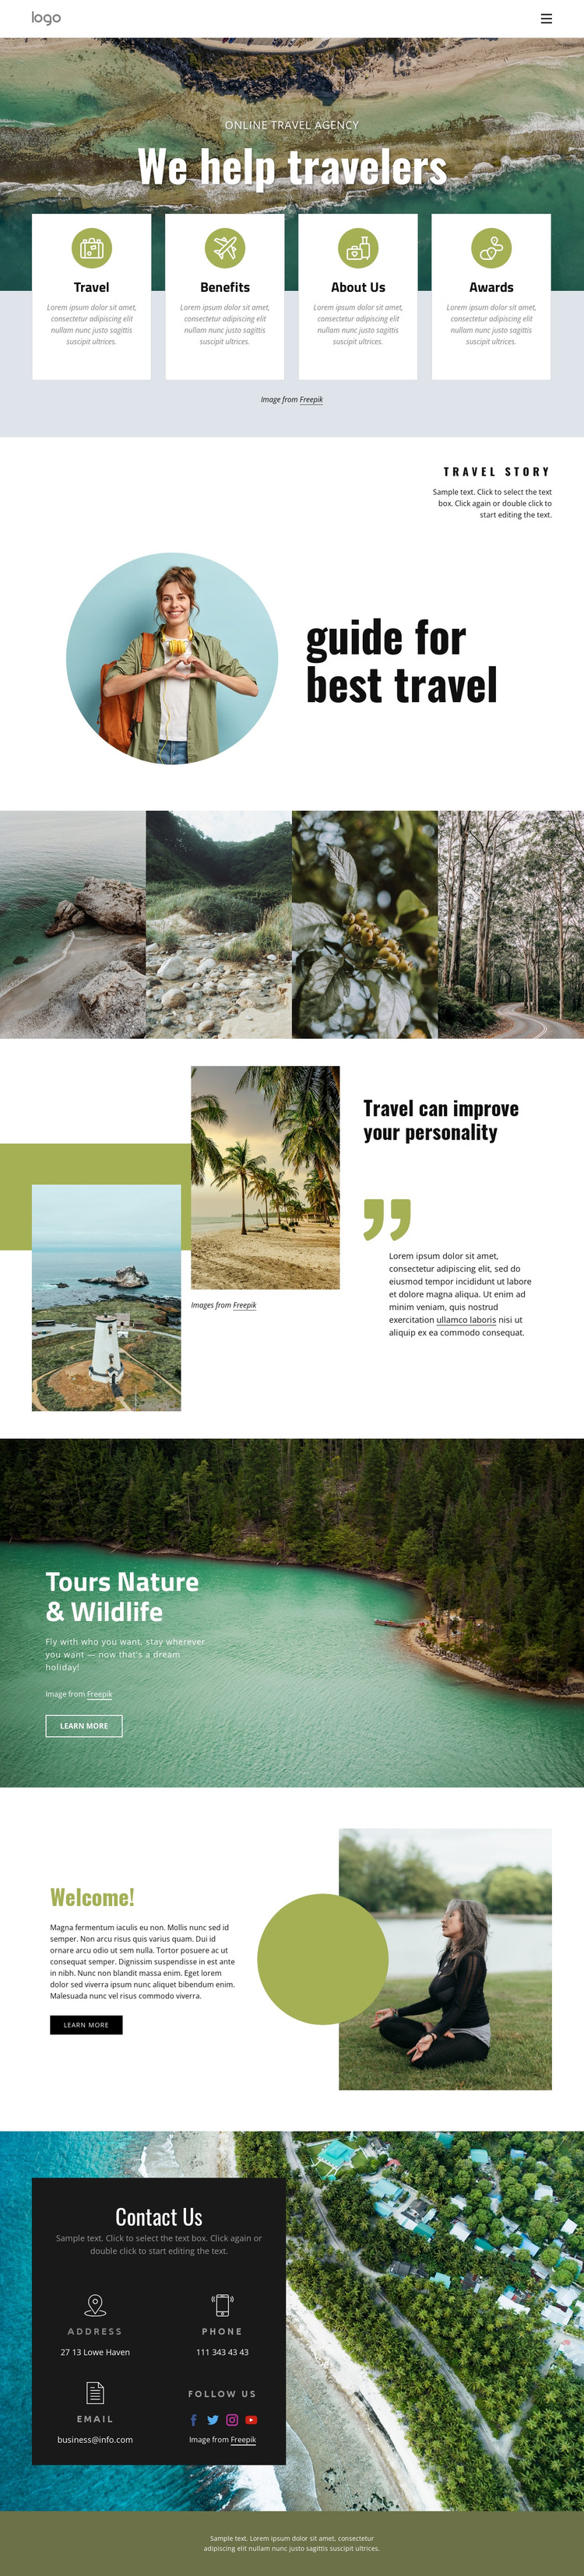 We help manage your trip HTML5 Template